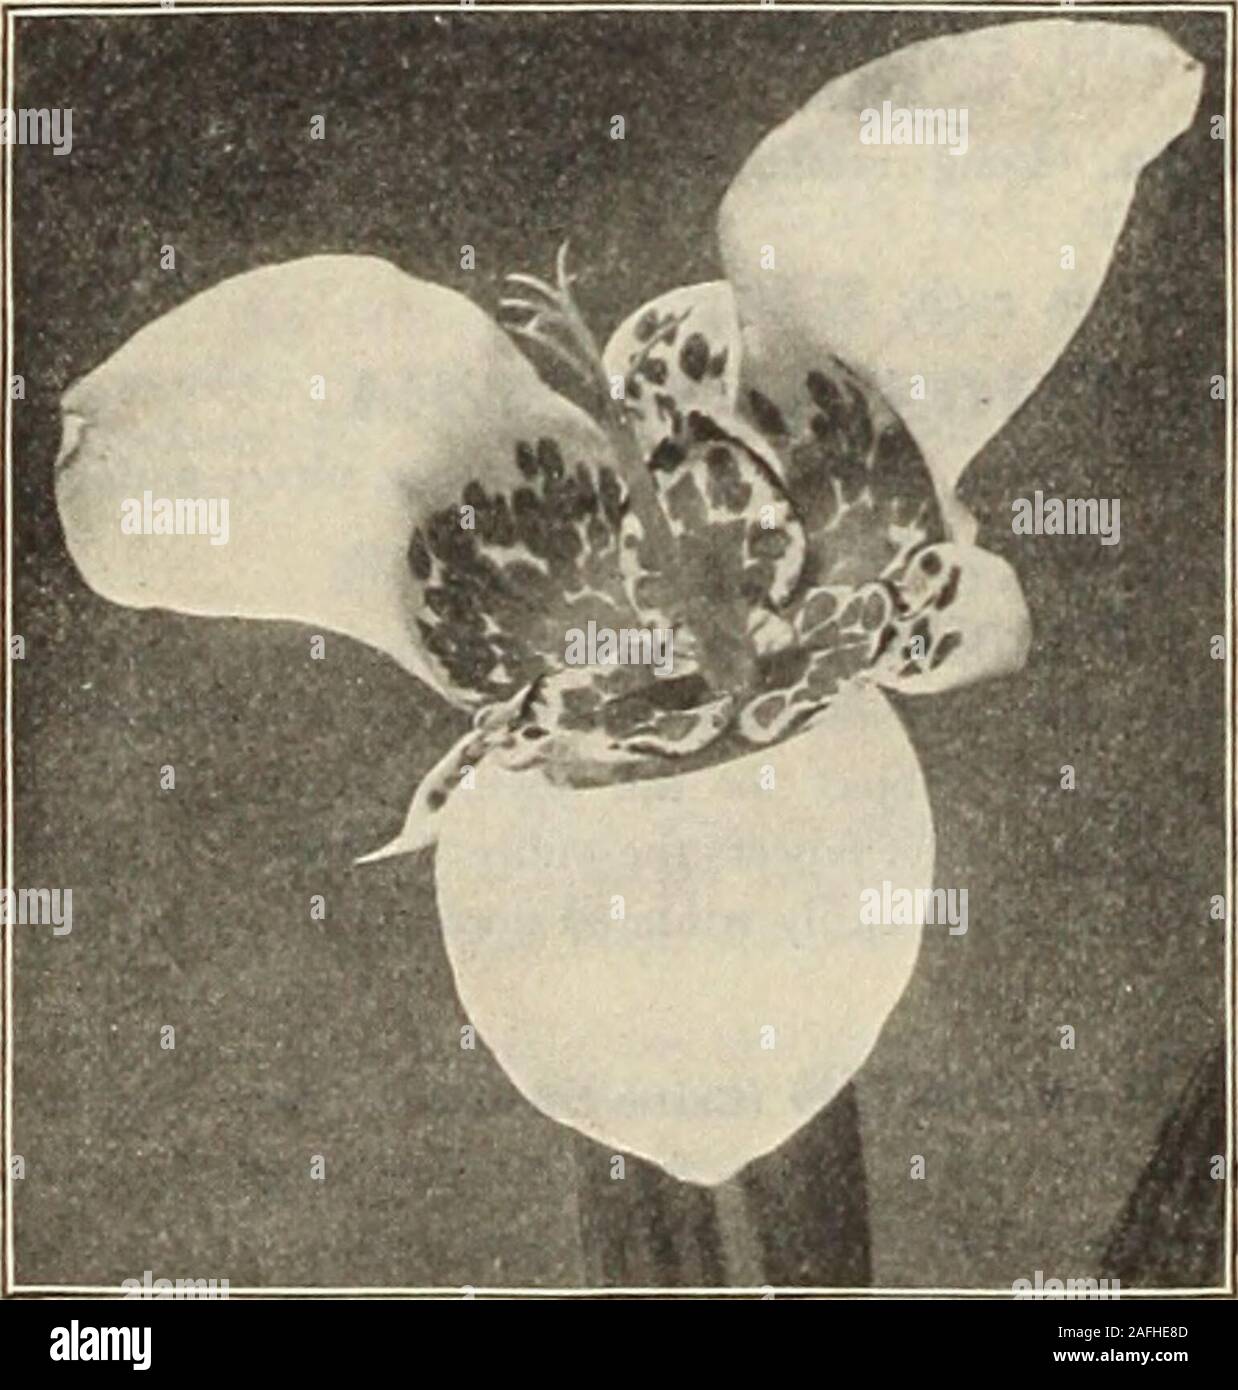 . Dreer's garden book 1915. Stigmaphyllon Cimatum.. TiGRIDIA. R SCARI ET Sa(.F,. PONFIHK. S%AI]SSOIVA. Galegifolia Alba. A most desirableeverblooniing plant, with pure whi.eSweet Pea-like flowers, produced insprays. Its easy culture, freedomof bloom, and the grace and beautyof the flower and plant, make it pop-ular. l-T cts, each; $1.50 per doz. THrXBERGIA. Harrisii. A splen&lt;lid winter-flower-ing [jreenhouse climber, with showylight blue flowers with creamy-whitethroat. 35 cts. each; $3.50 per doz. TIGRiniAS. (Tiger, or Shell Flower.)These gorgeous summer-floweringbulbs look well associate Stock Photo